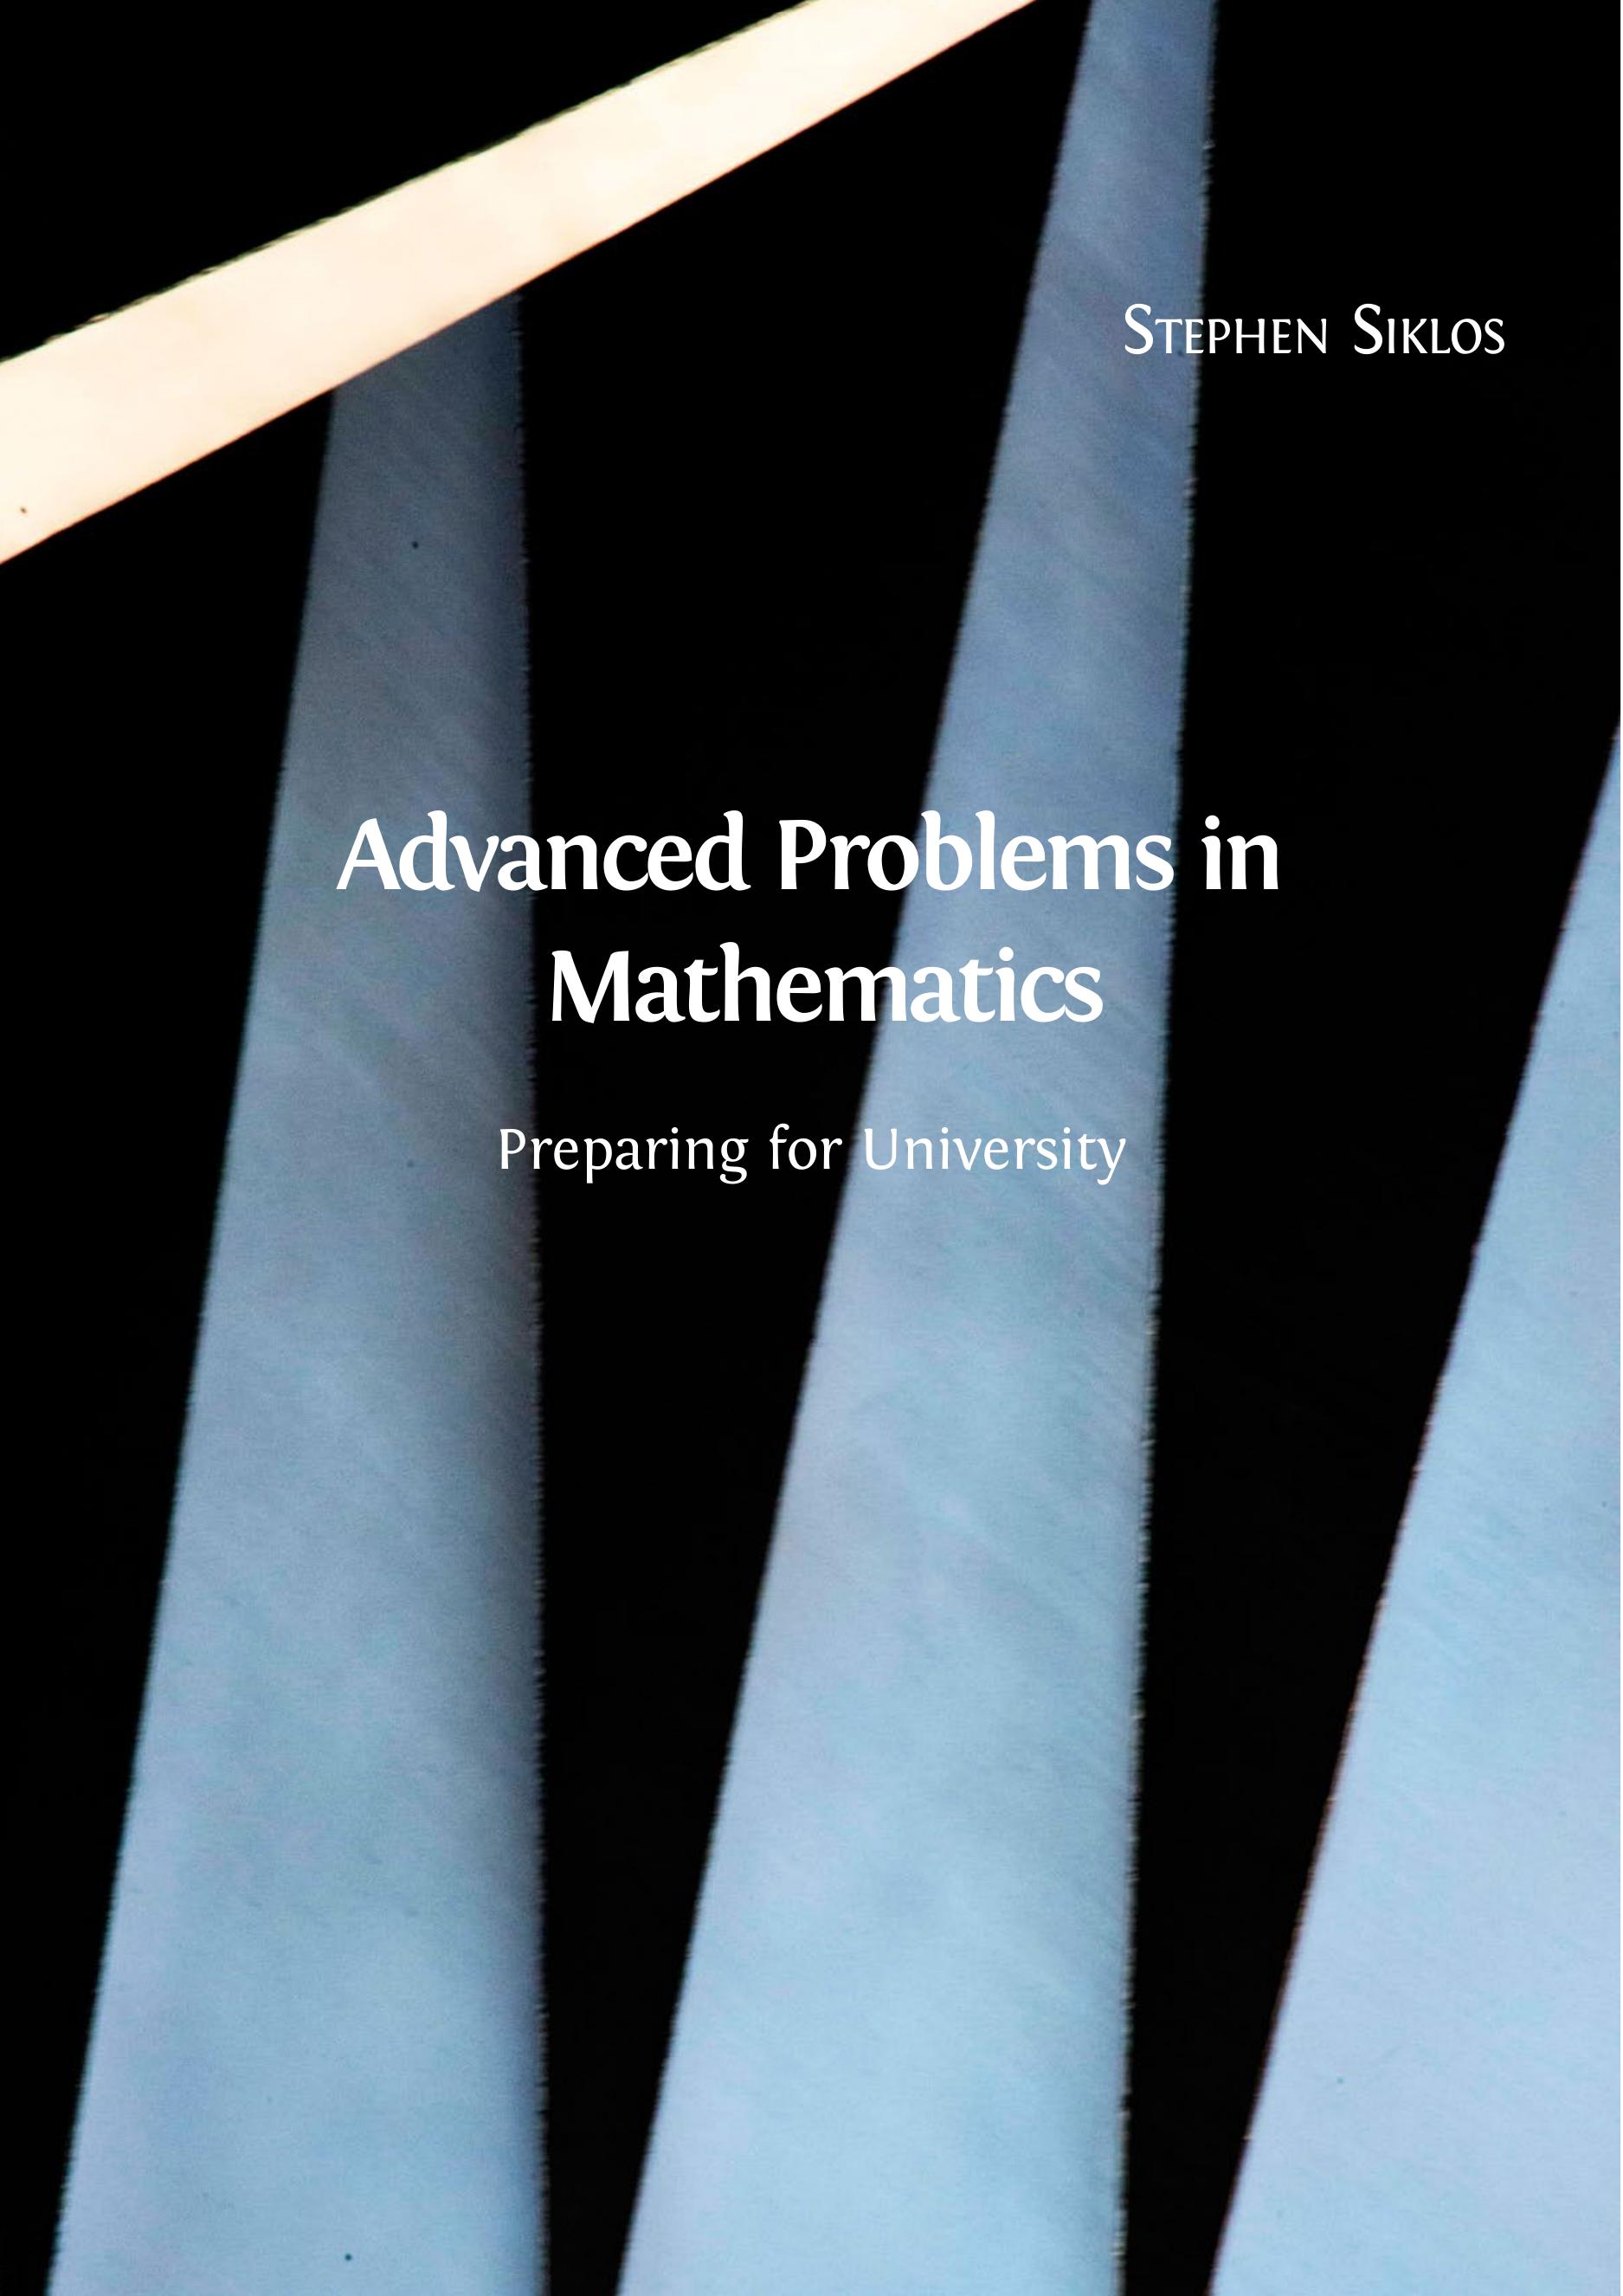 Advanced Problems in Mathematics: Preparing for University (archived)